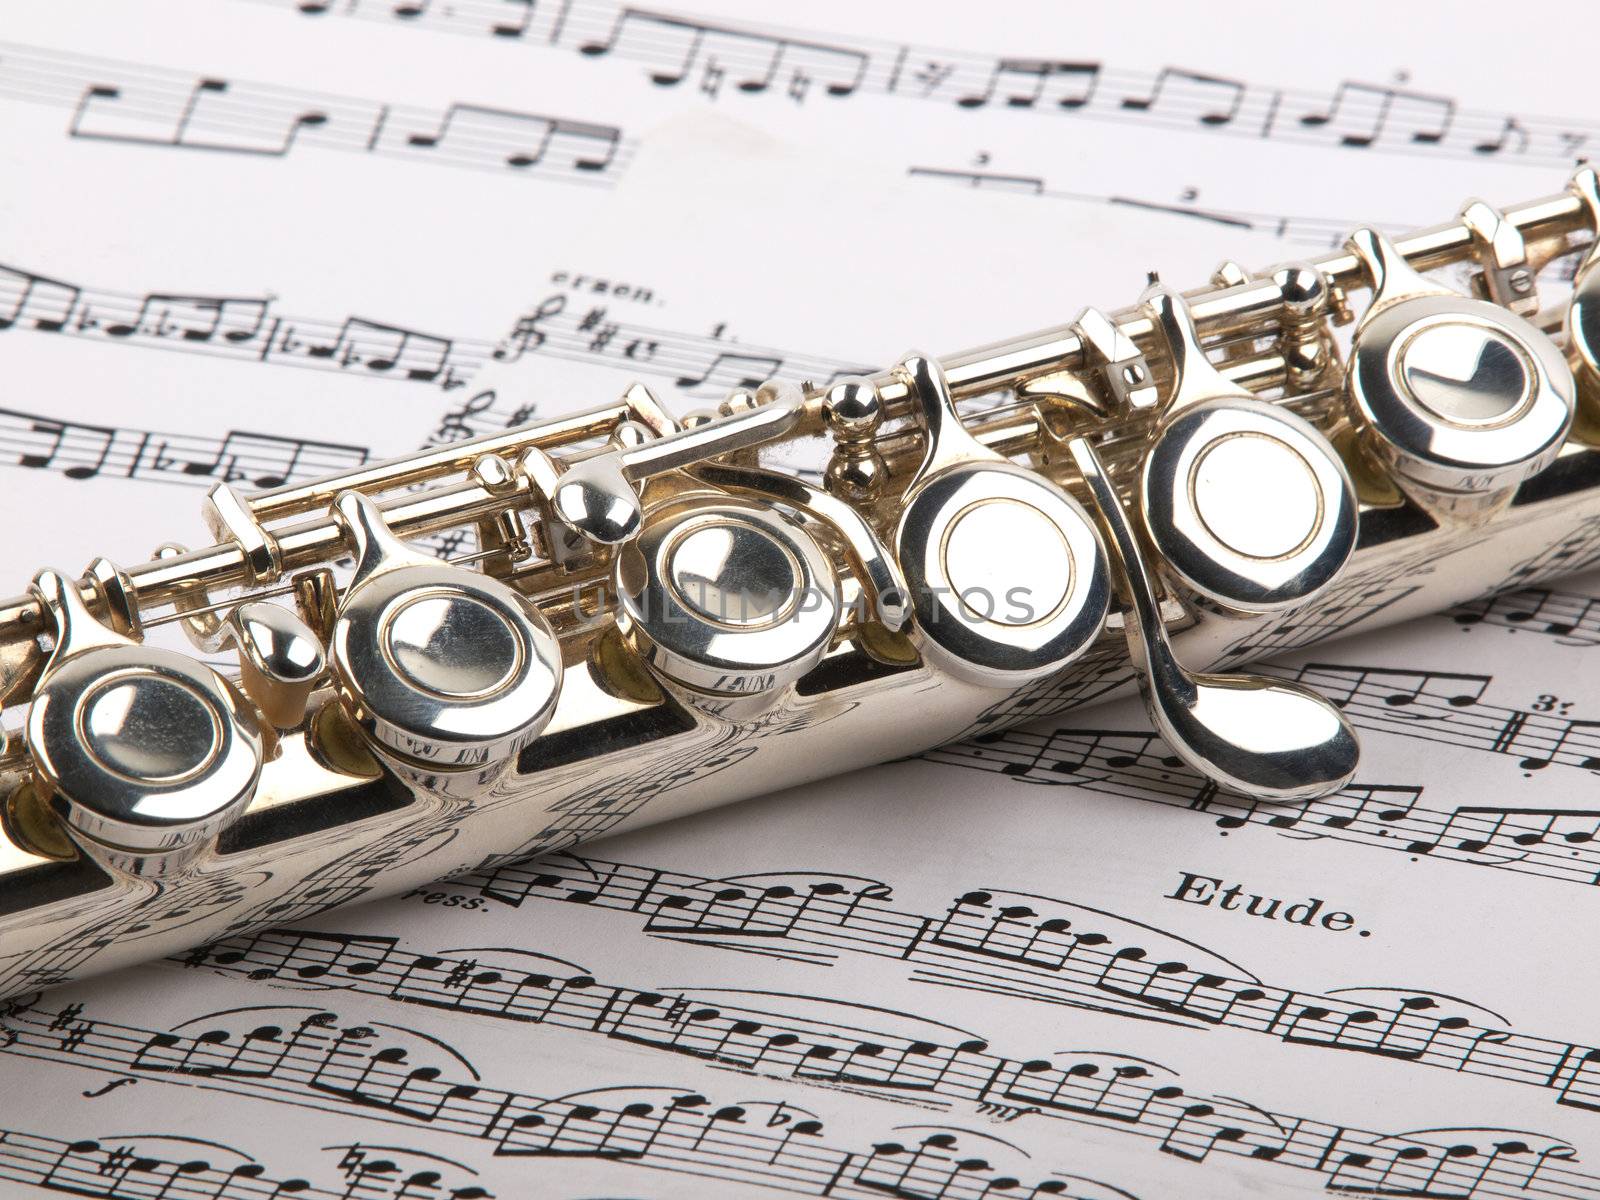  used flute rests across an open musical score. Only one line of music is in focus.